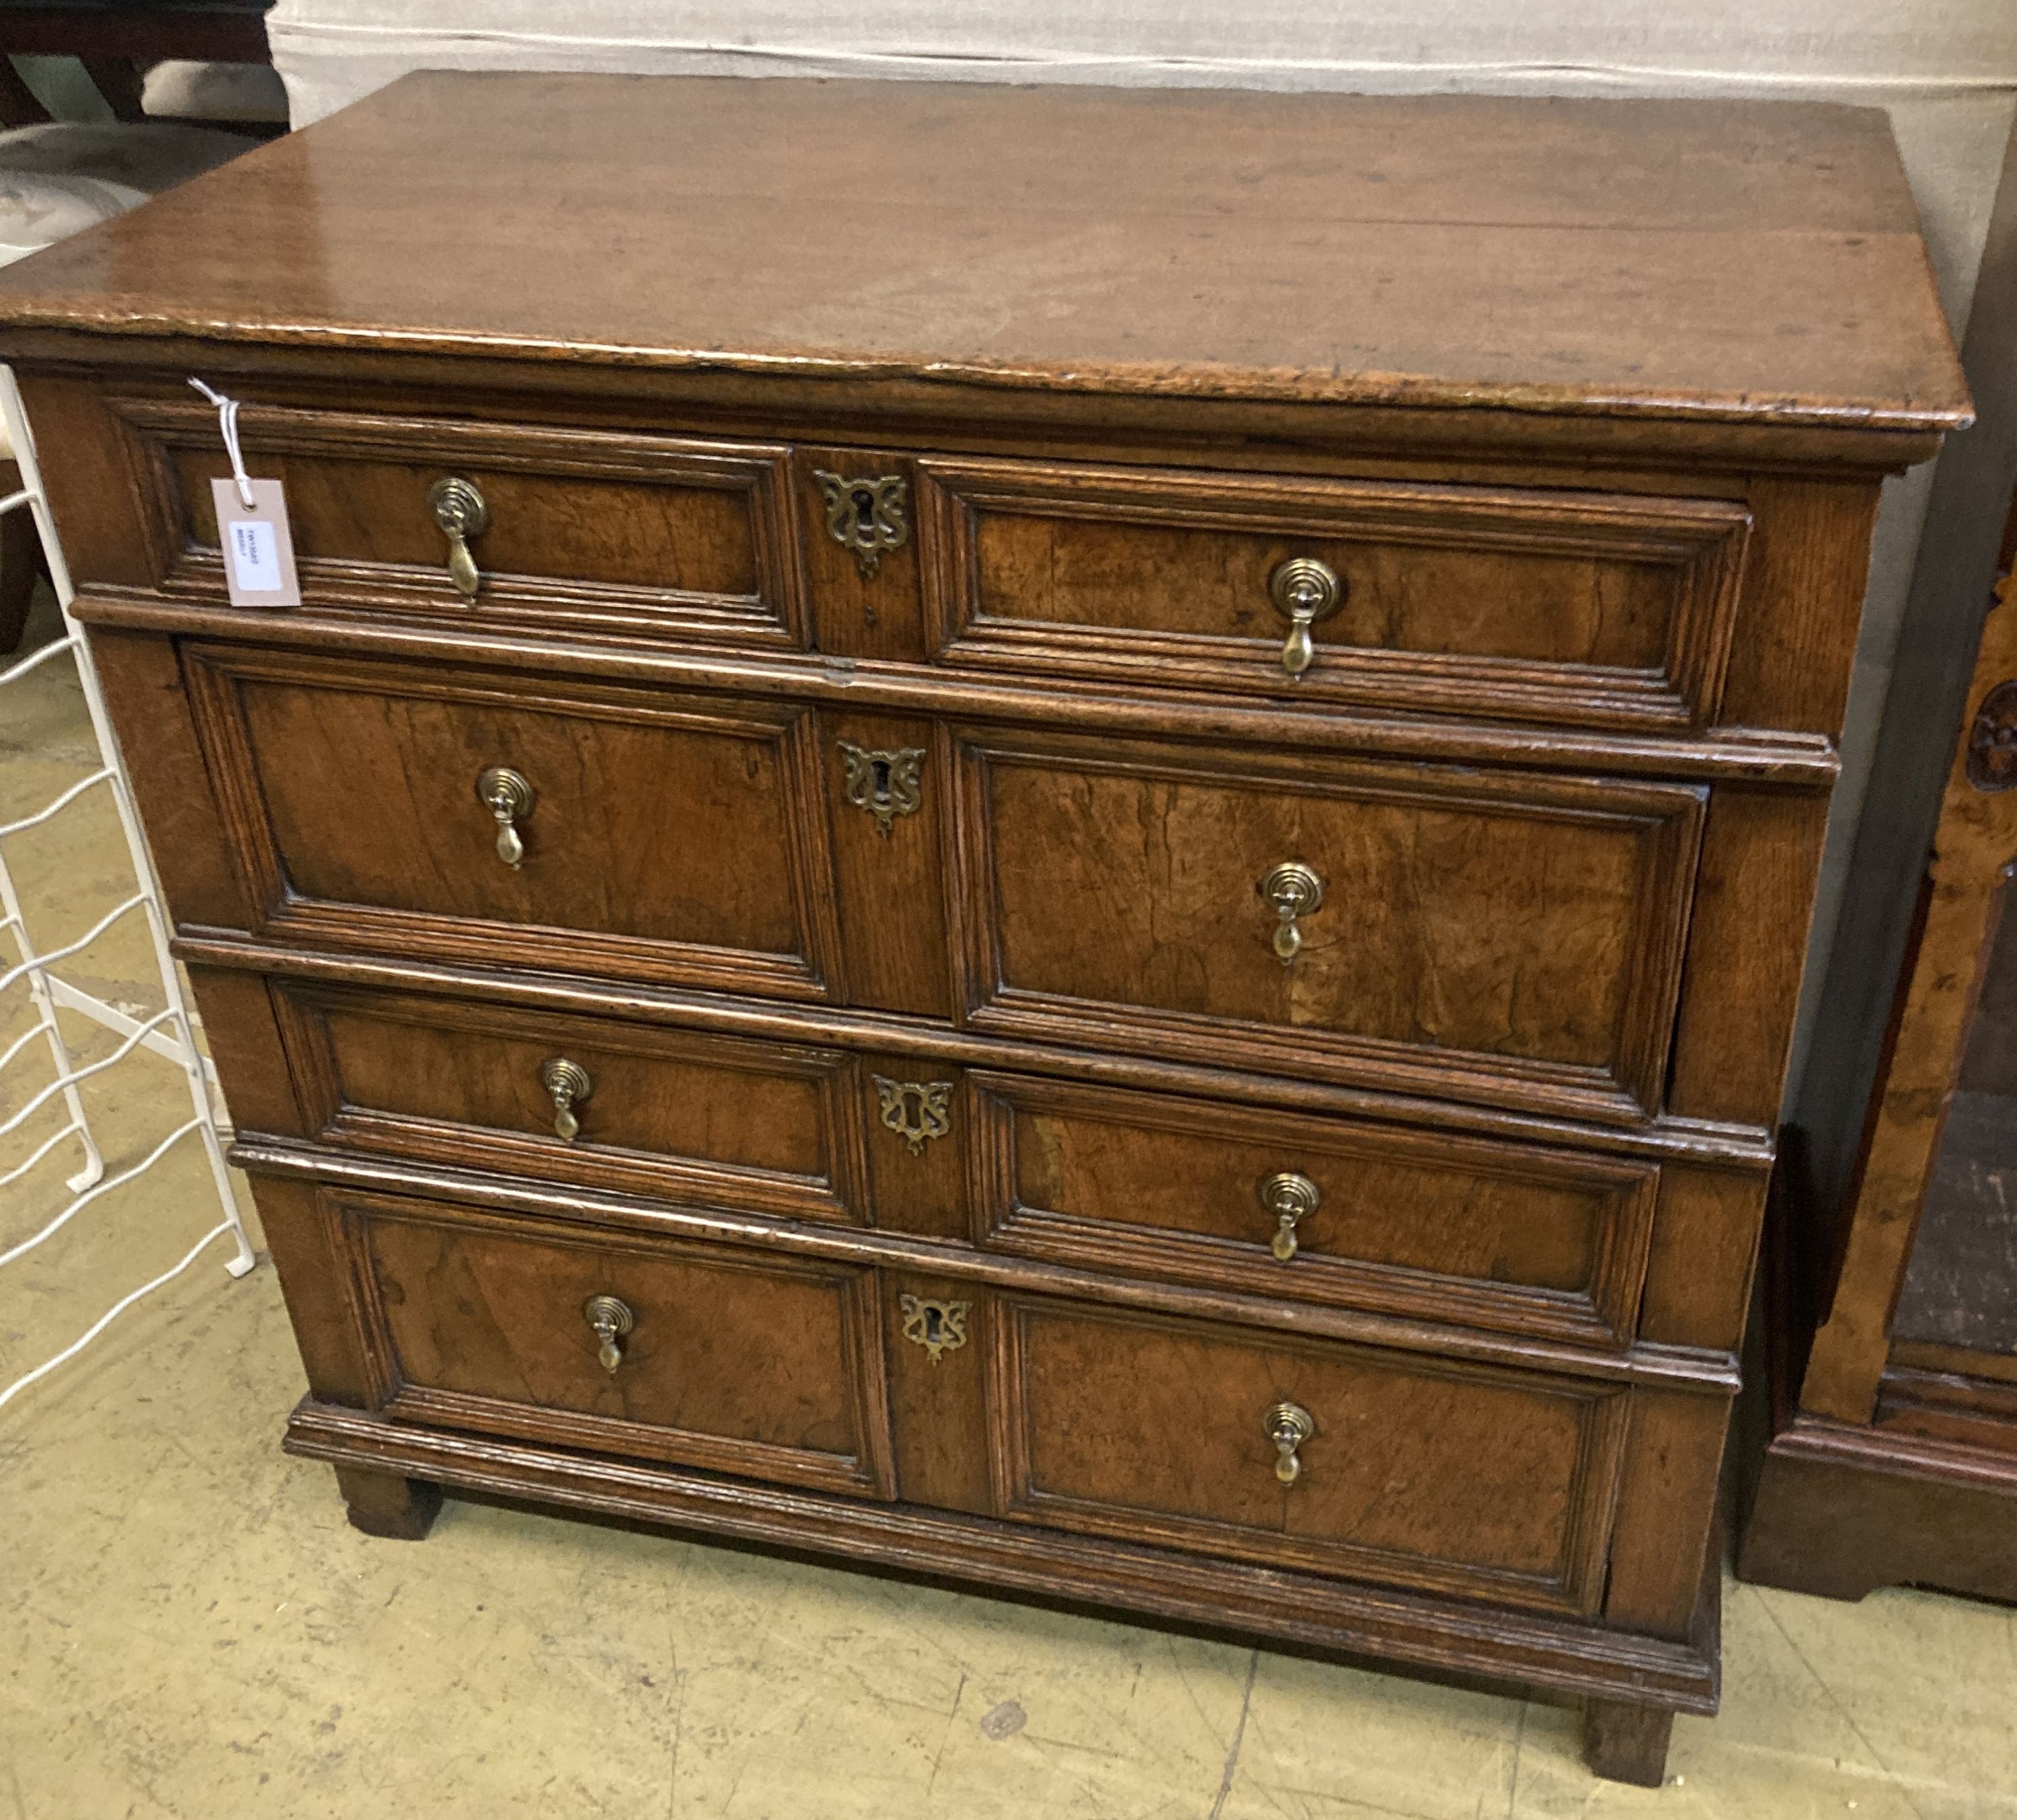 An oak and walnut chest, circa 1700, fitted two short drawers and three long drawers with mitred moulding